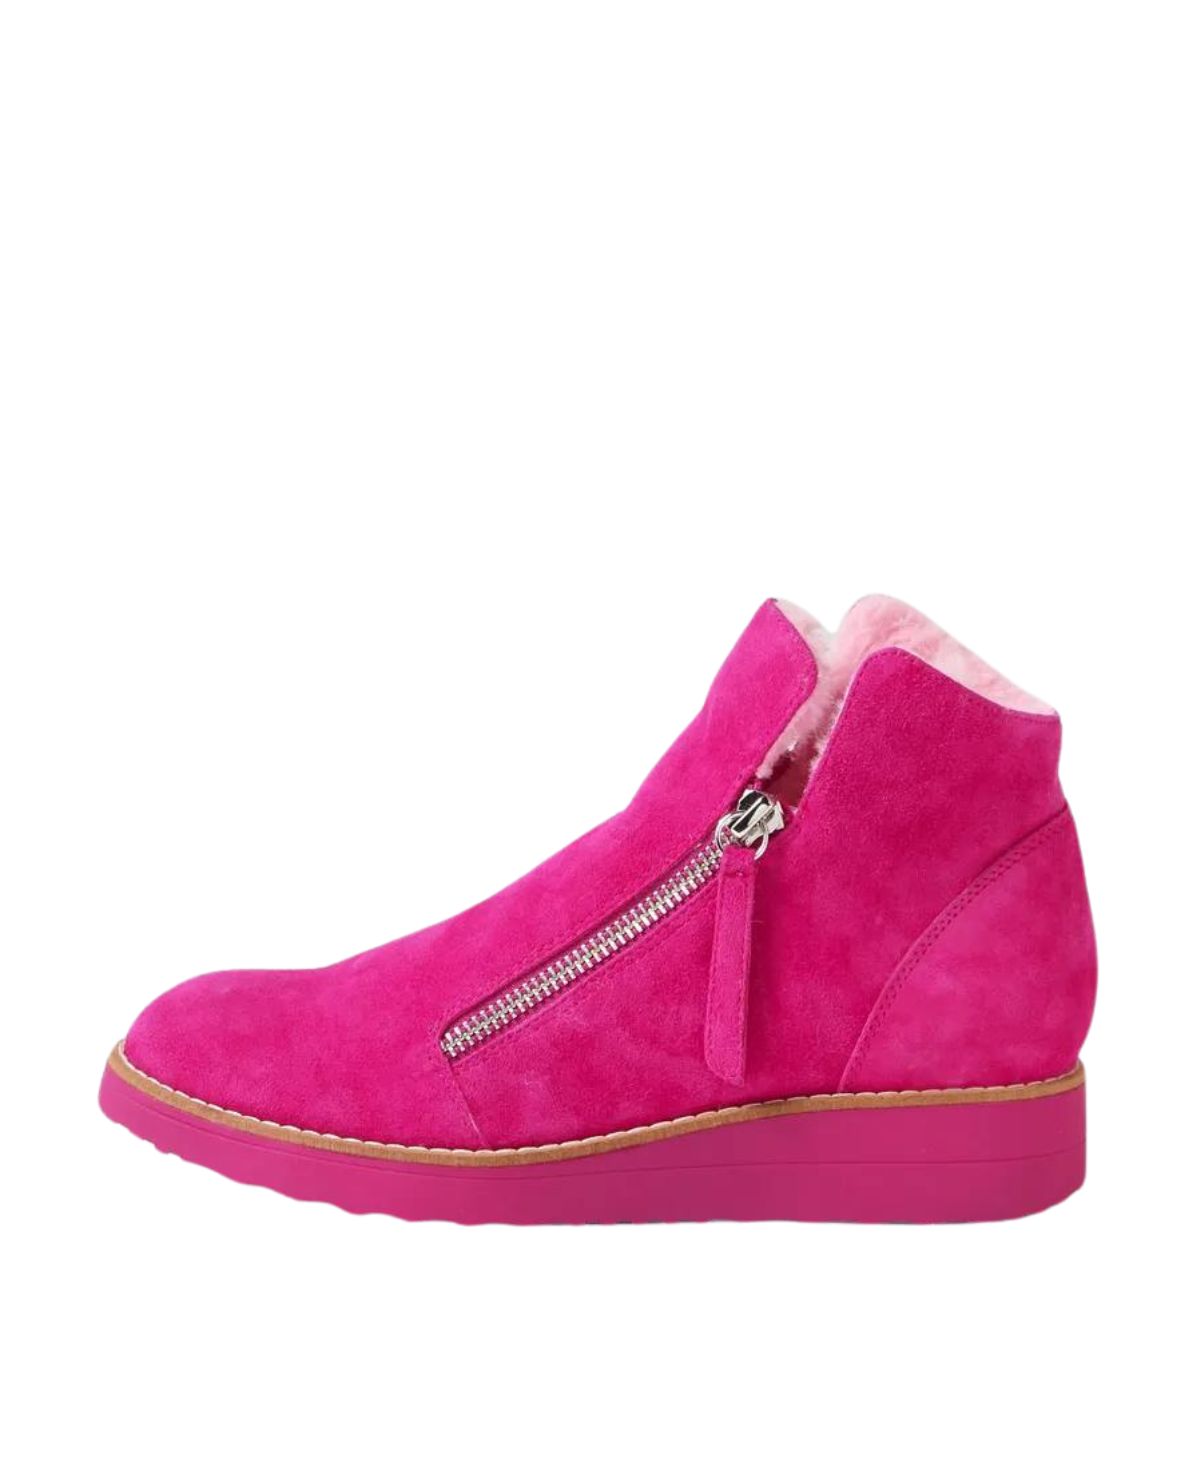 Opal Fuchsia Suede Fur Ankle Boots